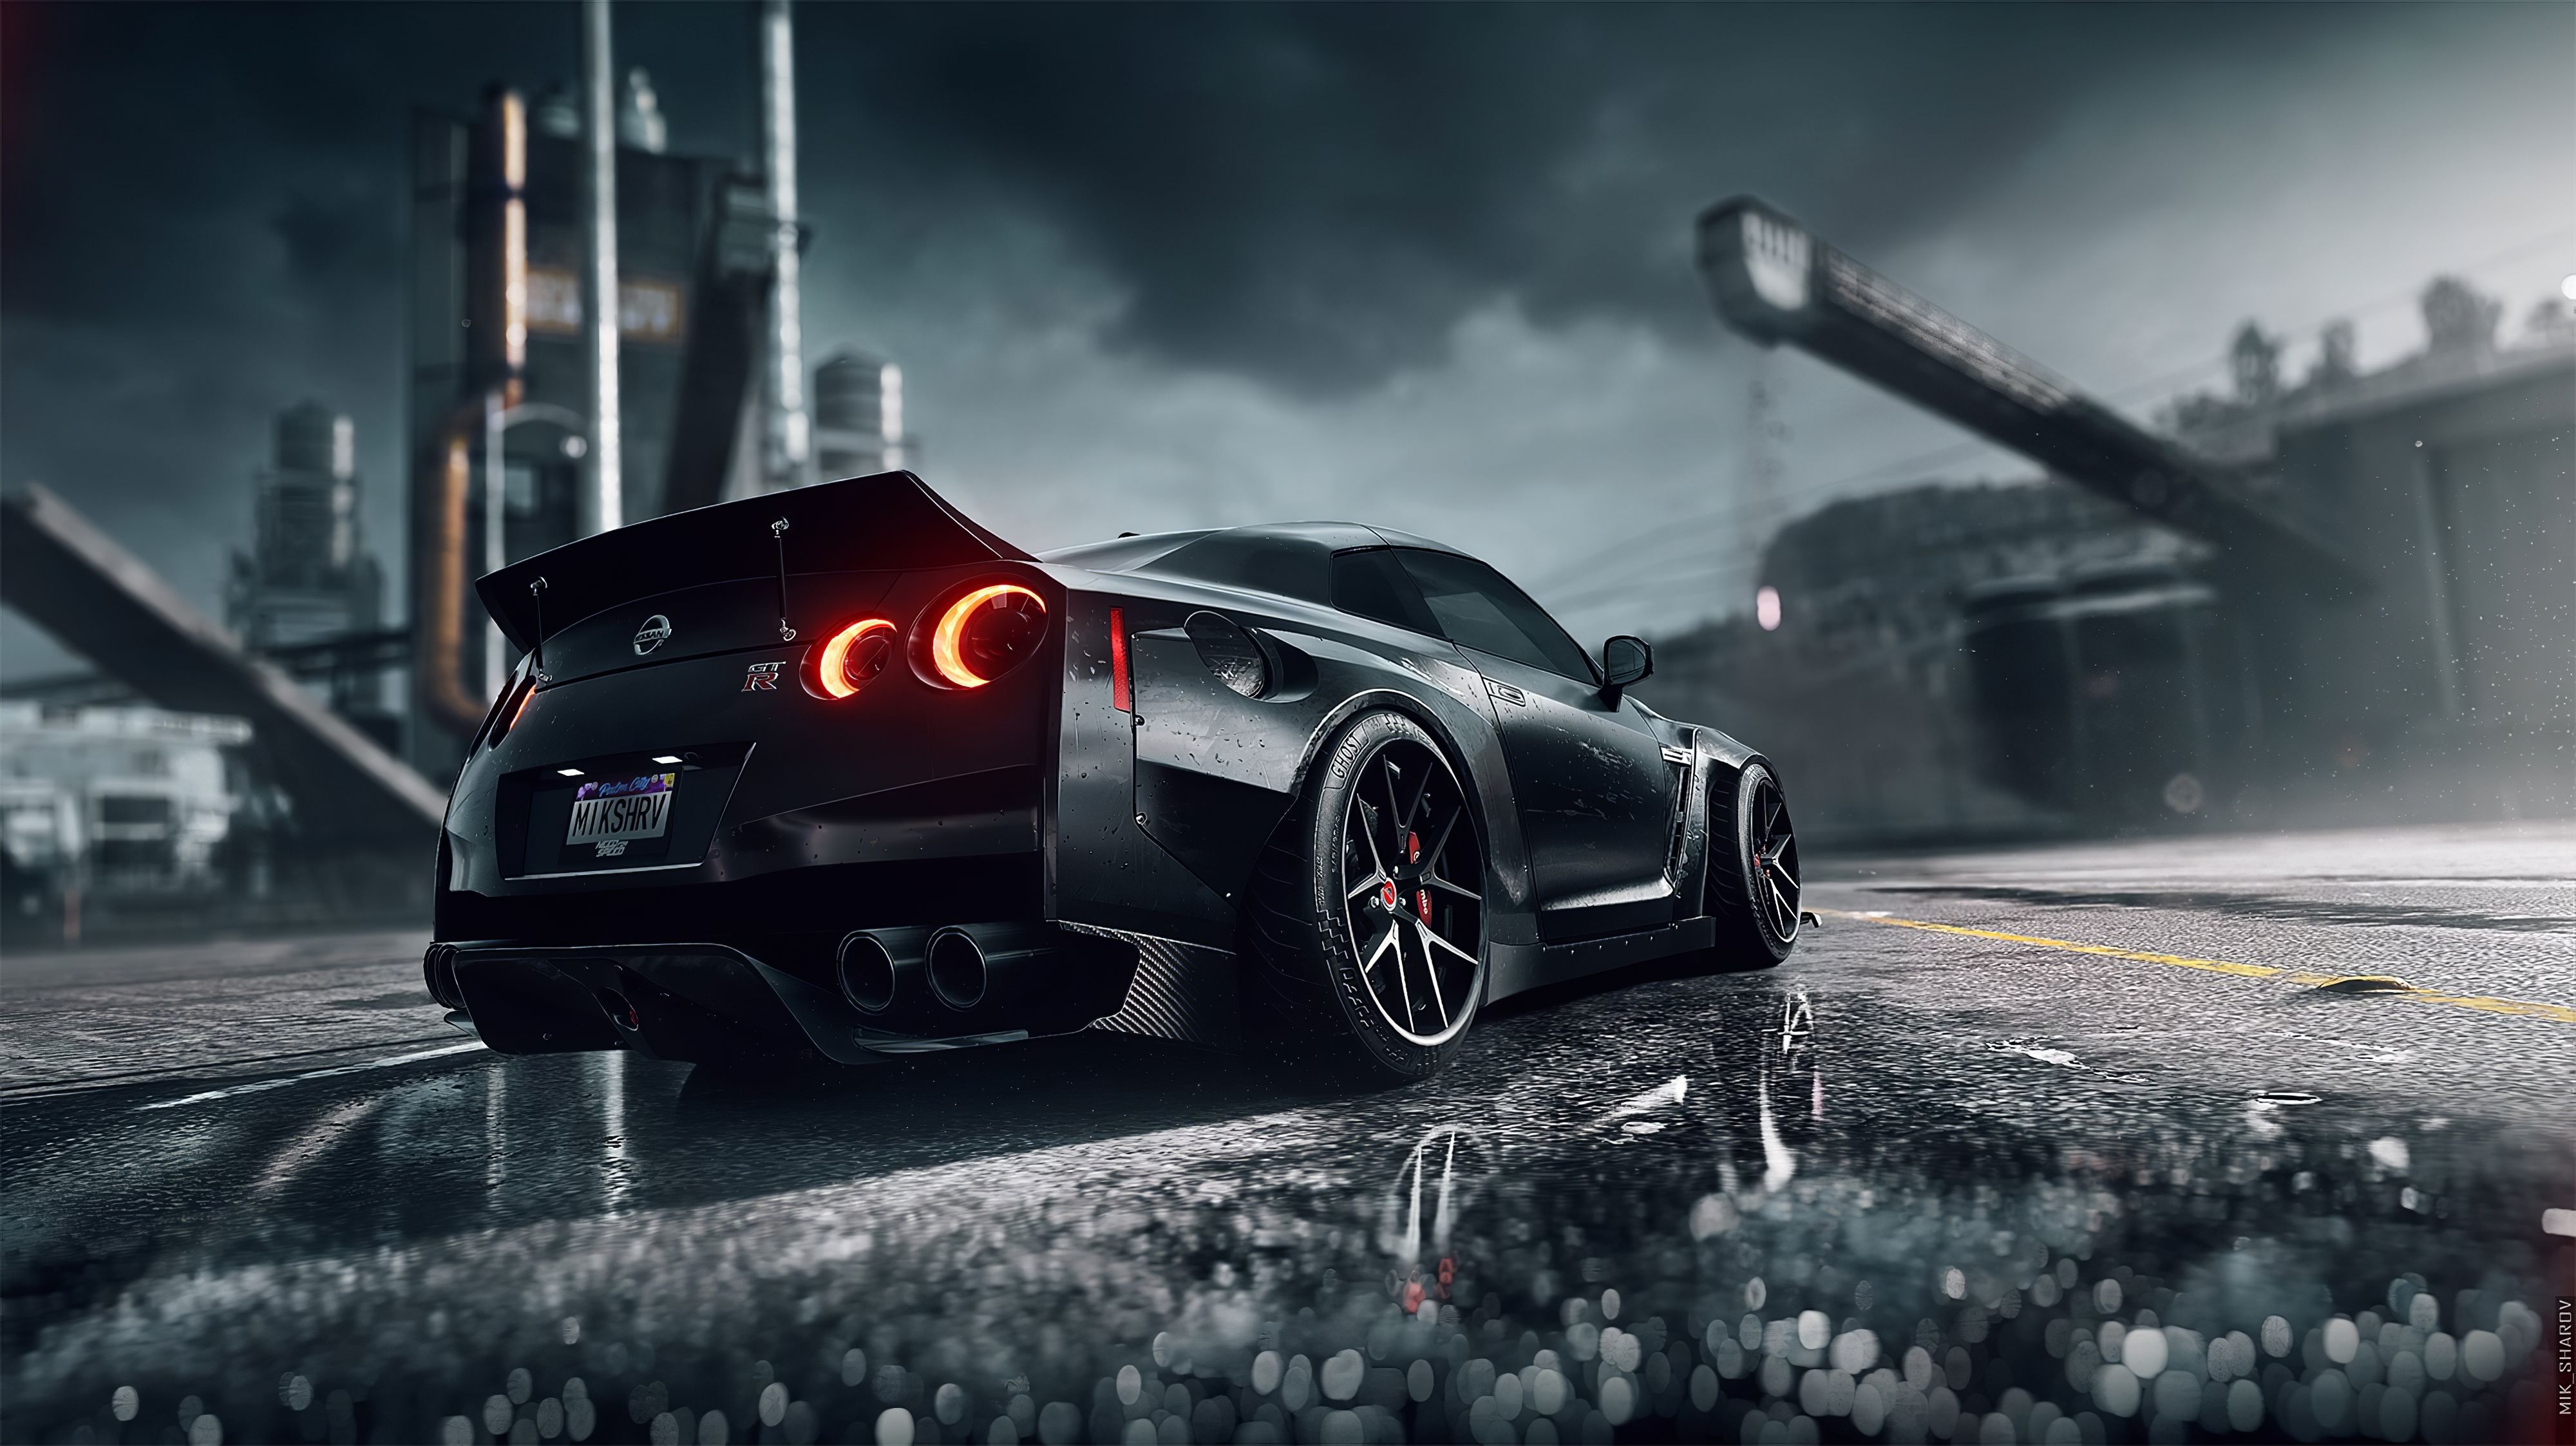 need for speed unbound pc download